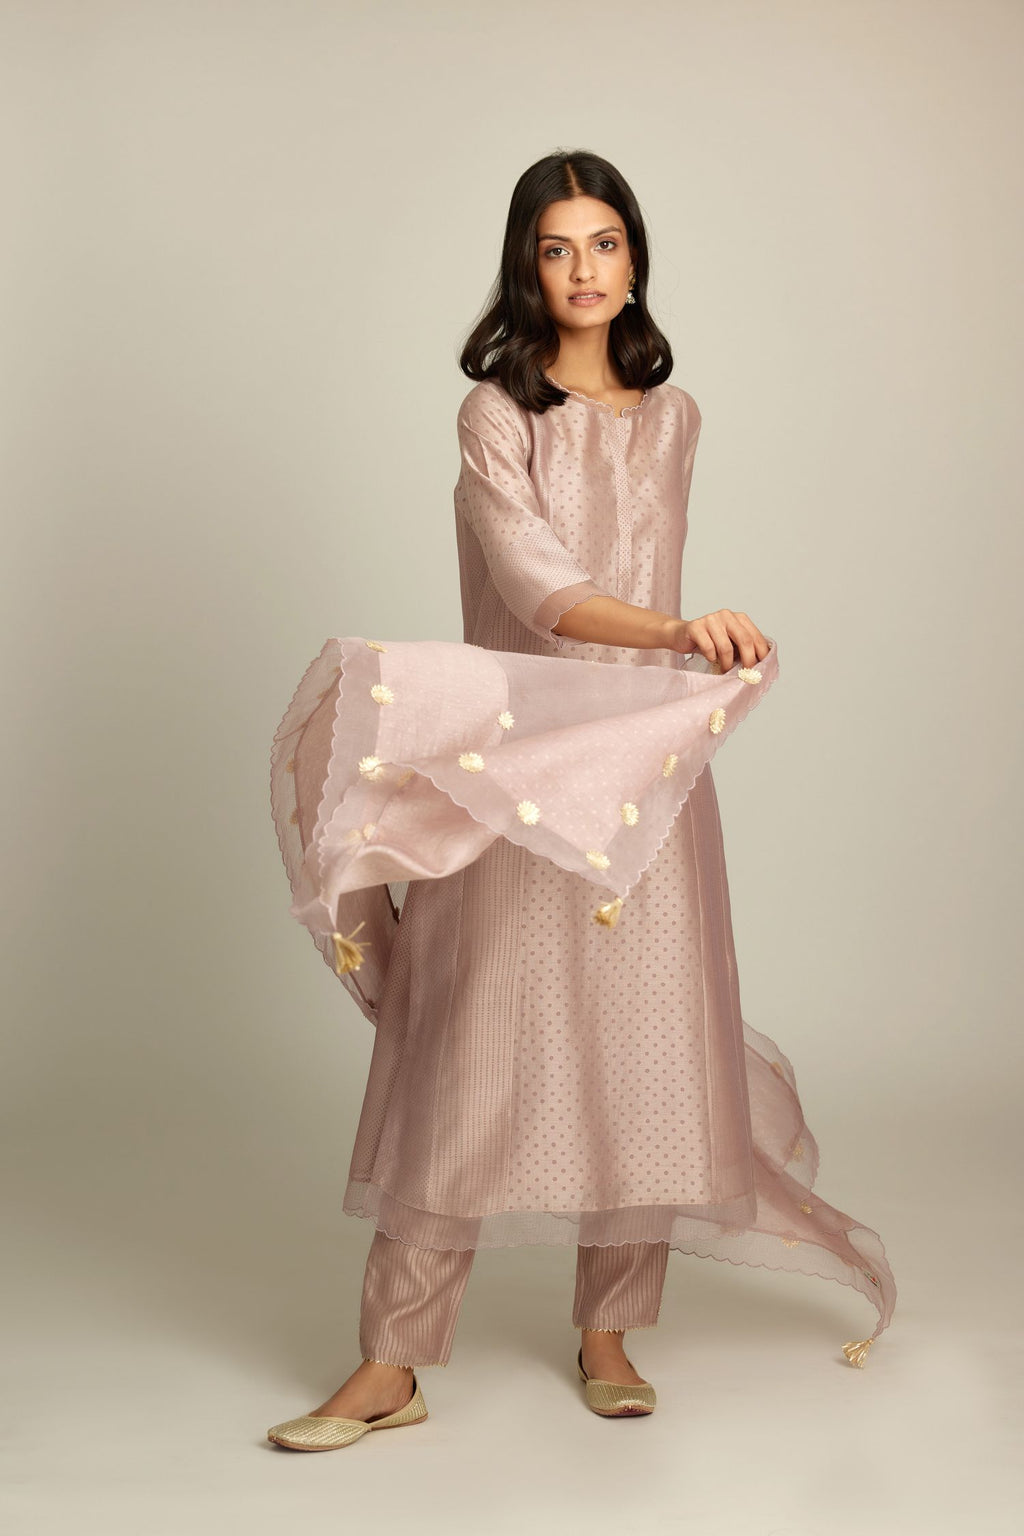 Lilac silk chanderi hand block printed straight kurta set with concealed button placket neckline, highlighted with scalloped organza at edges.